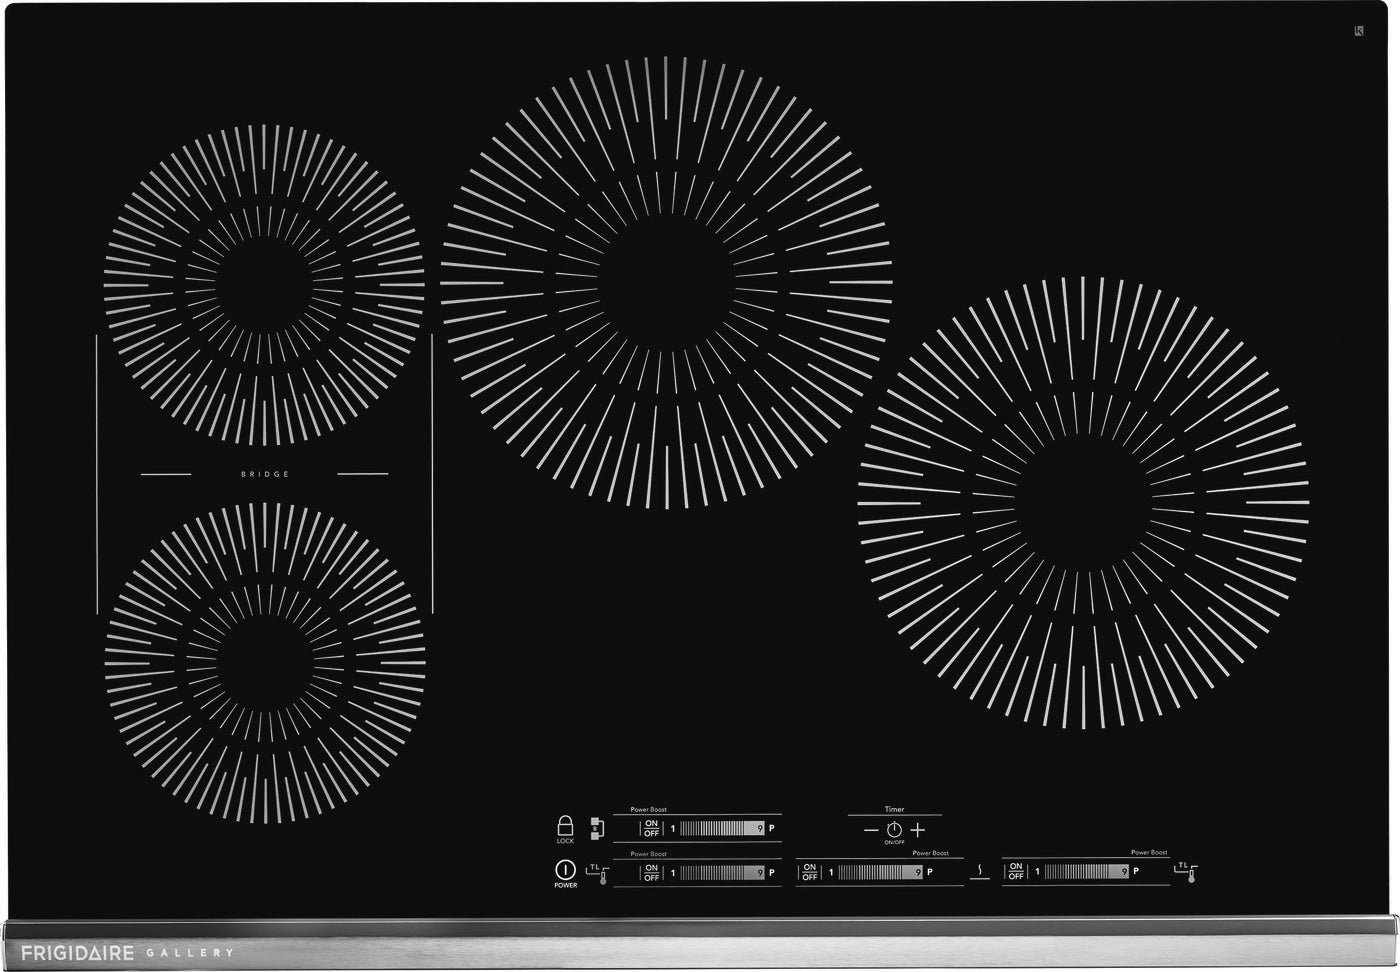 Frigidaire Gallery - 30.625 inch wide Induction Cooktop in Black - GCCI3067AB